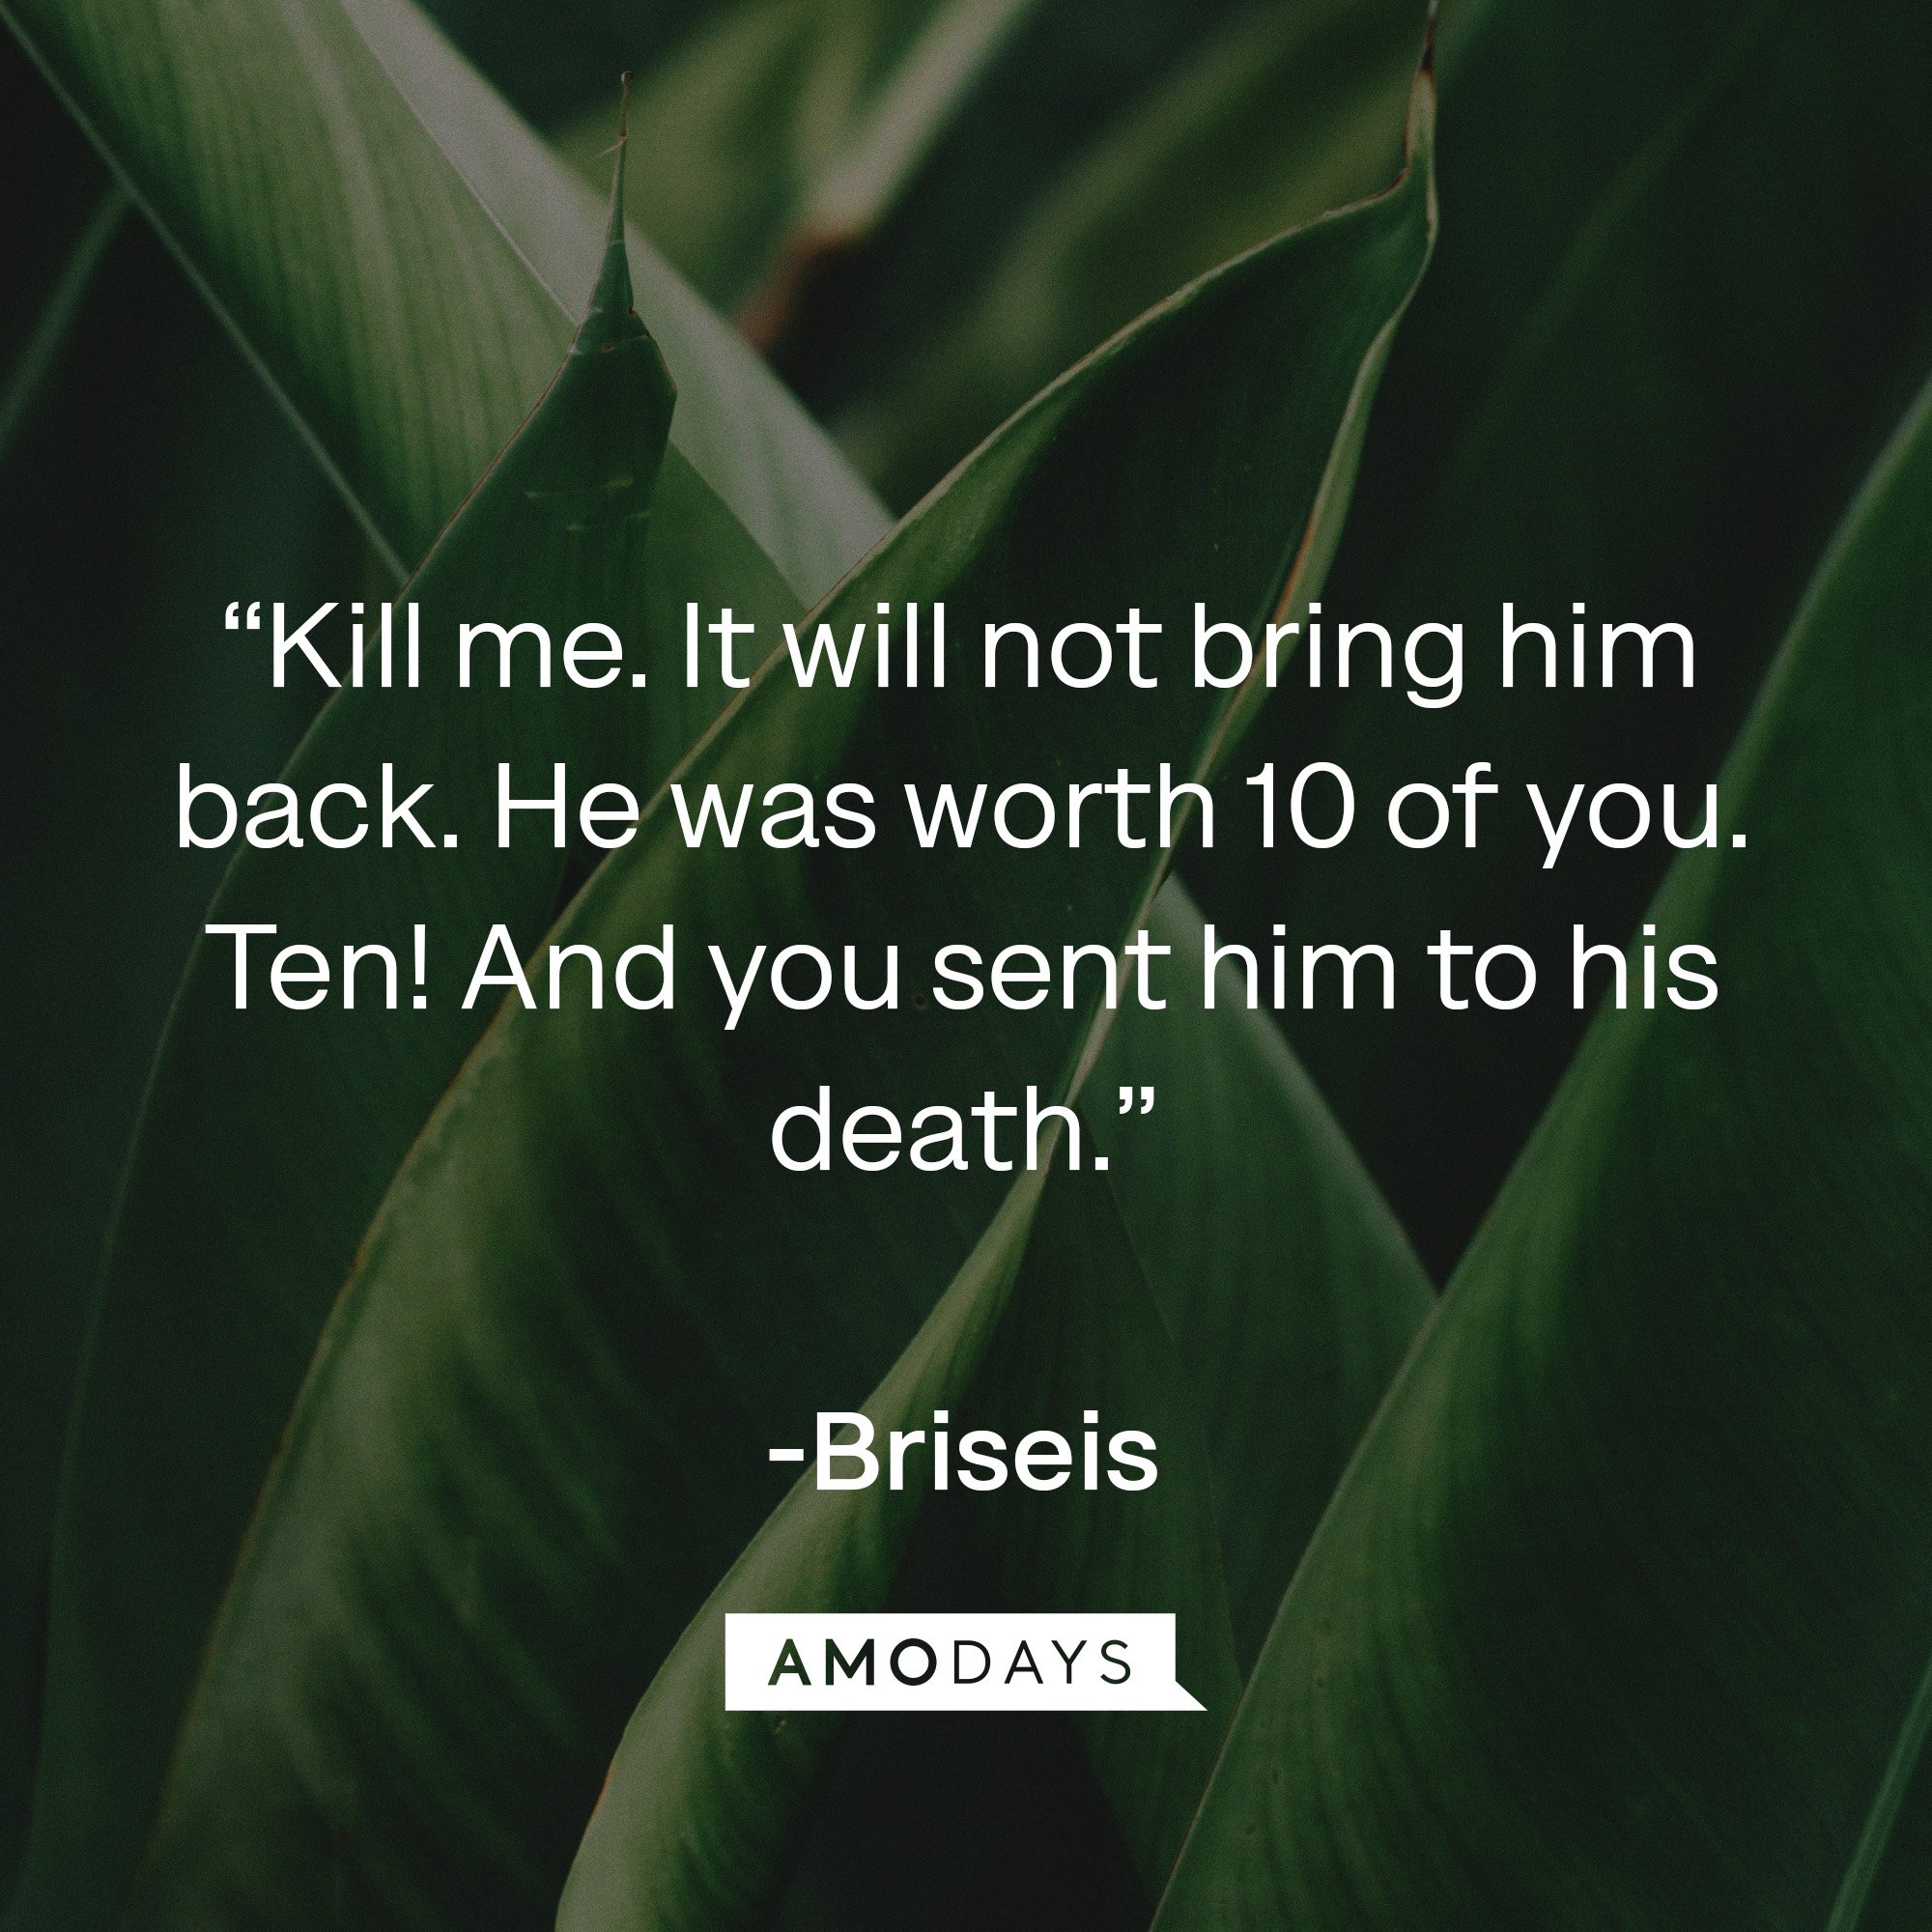 Briseis's quote: “Kill me. It will not bring him back. He was worth 10 of you. Ten! And you sent him to his death.” | Image: AmoDays